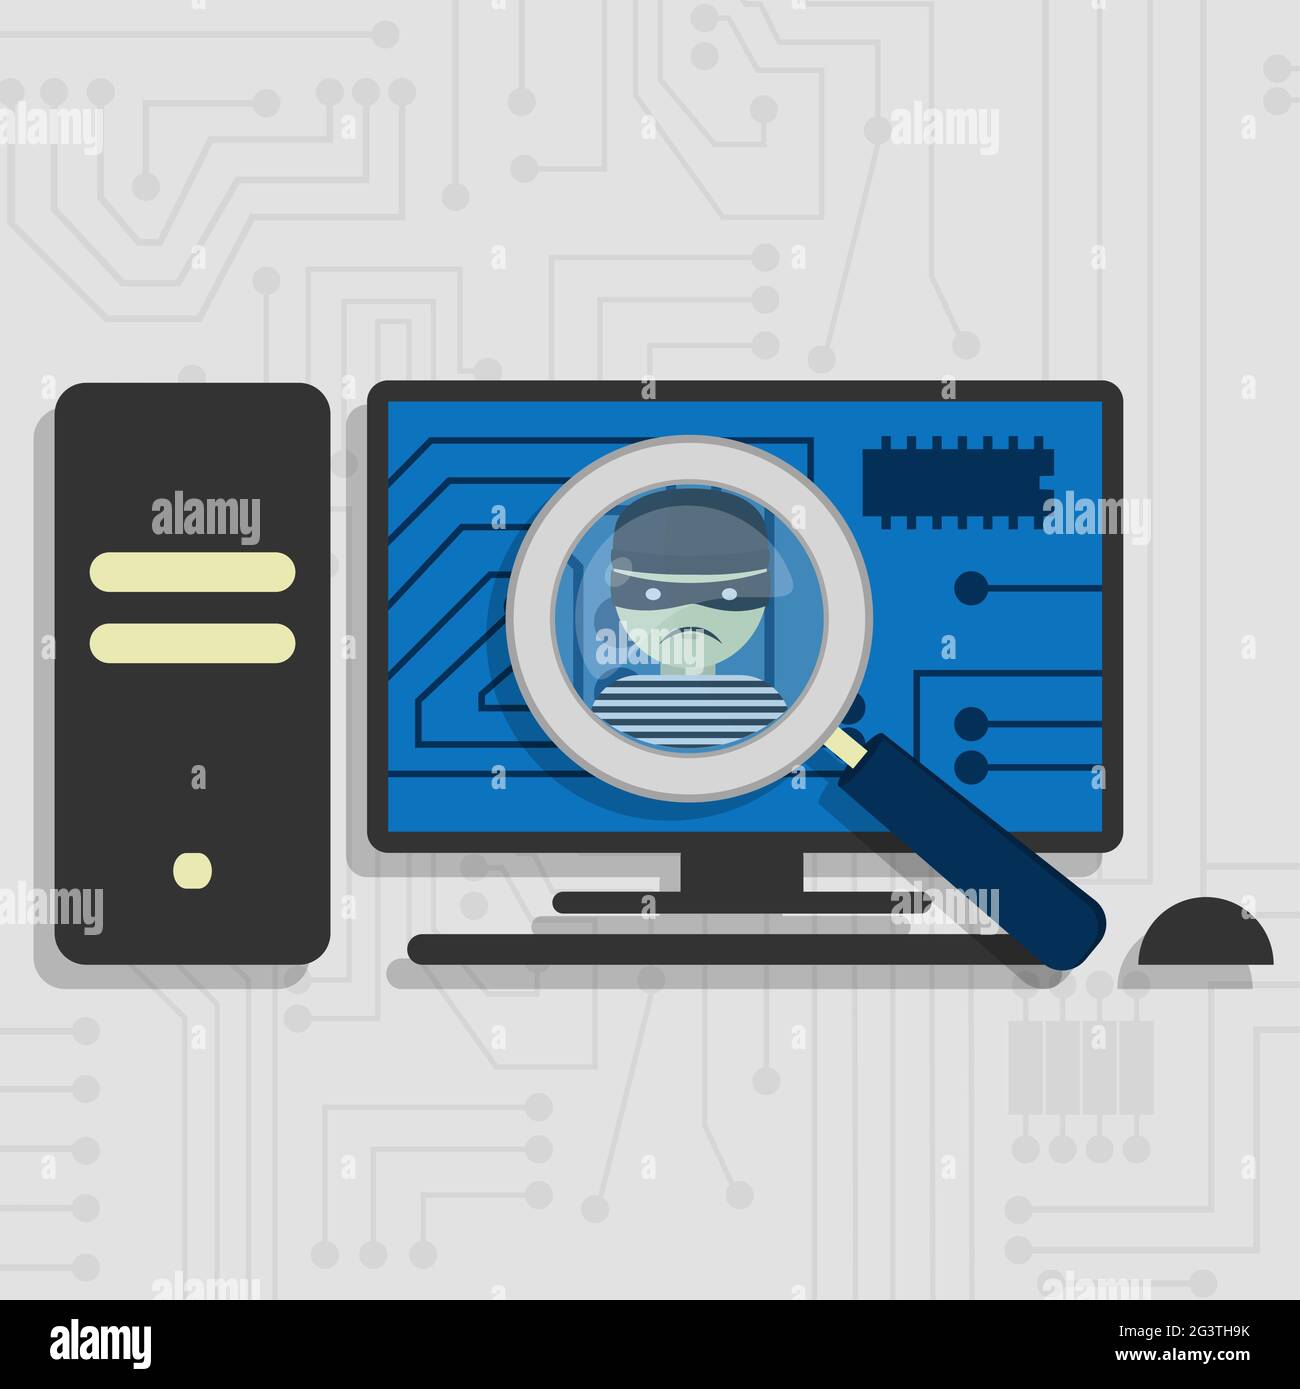 Malware detected on pc represented by a magnifying glass focusing on the figure of a thief Stock Vector